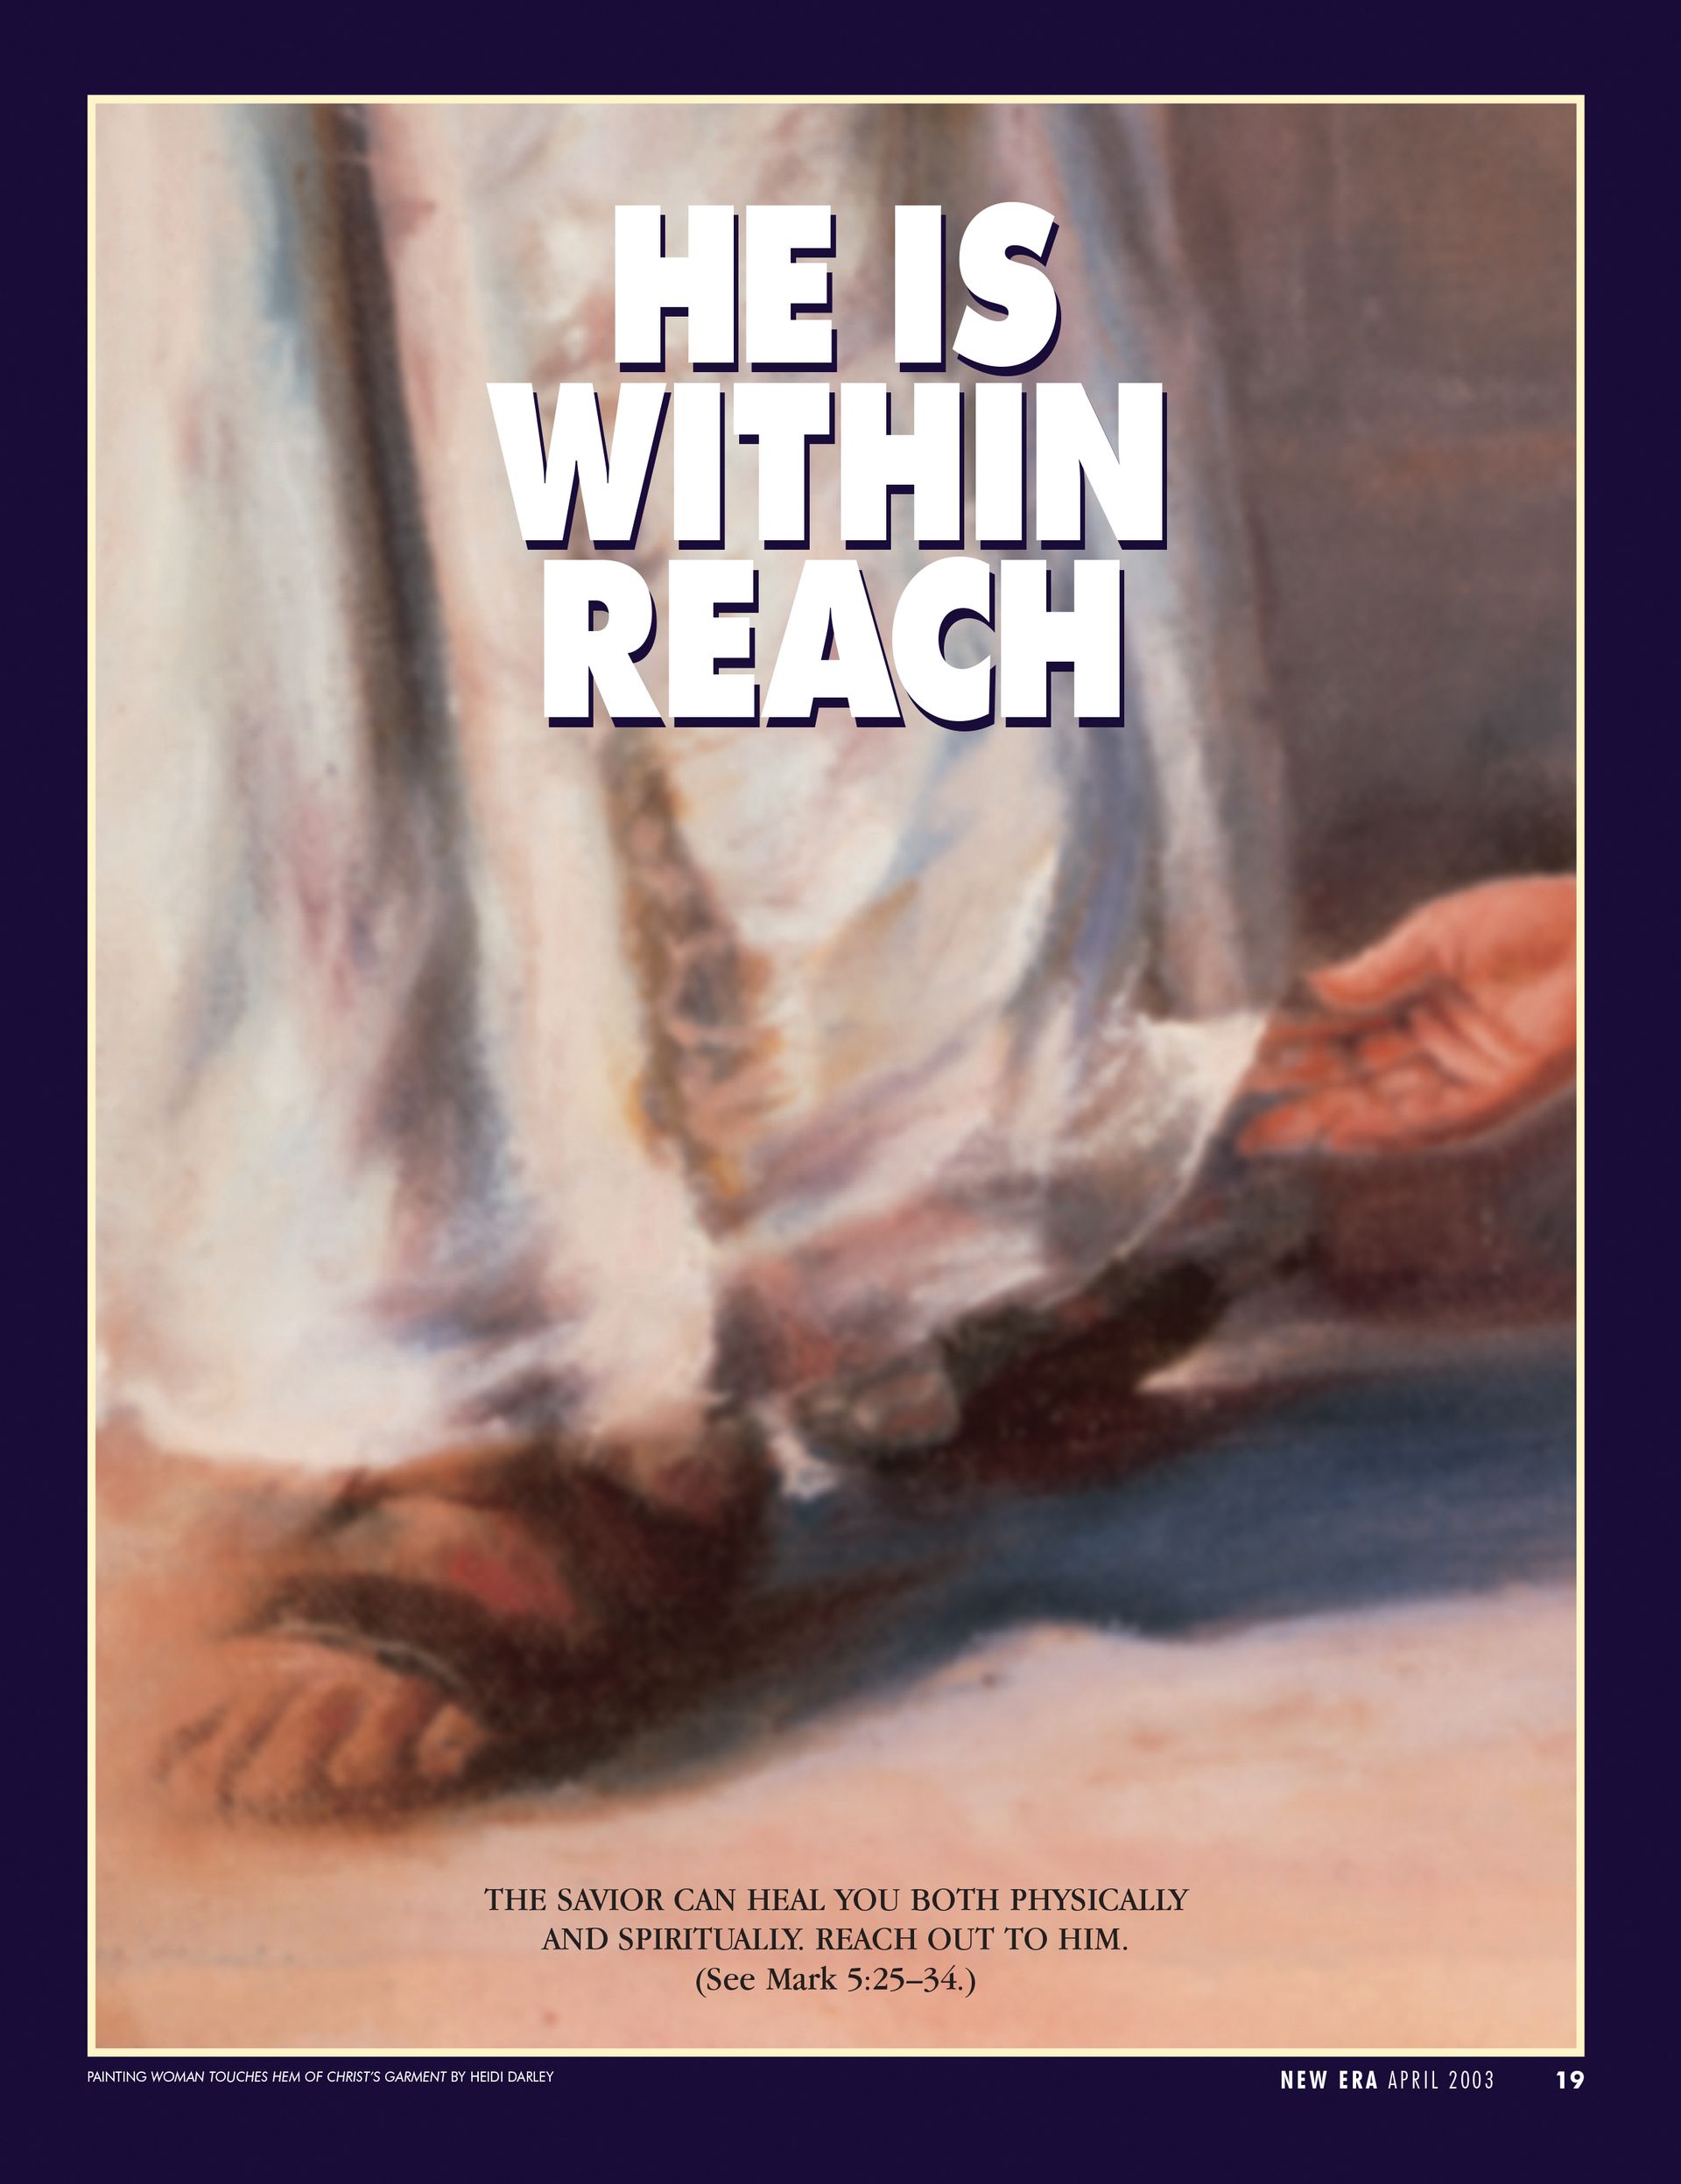 He Is within Reach. The Savior can heal you both physically and spiritually. Reach out to Him. (See Mark 5:25–34.) Apr. 2003 © undefined ipCode 1.